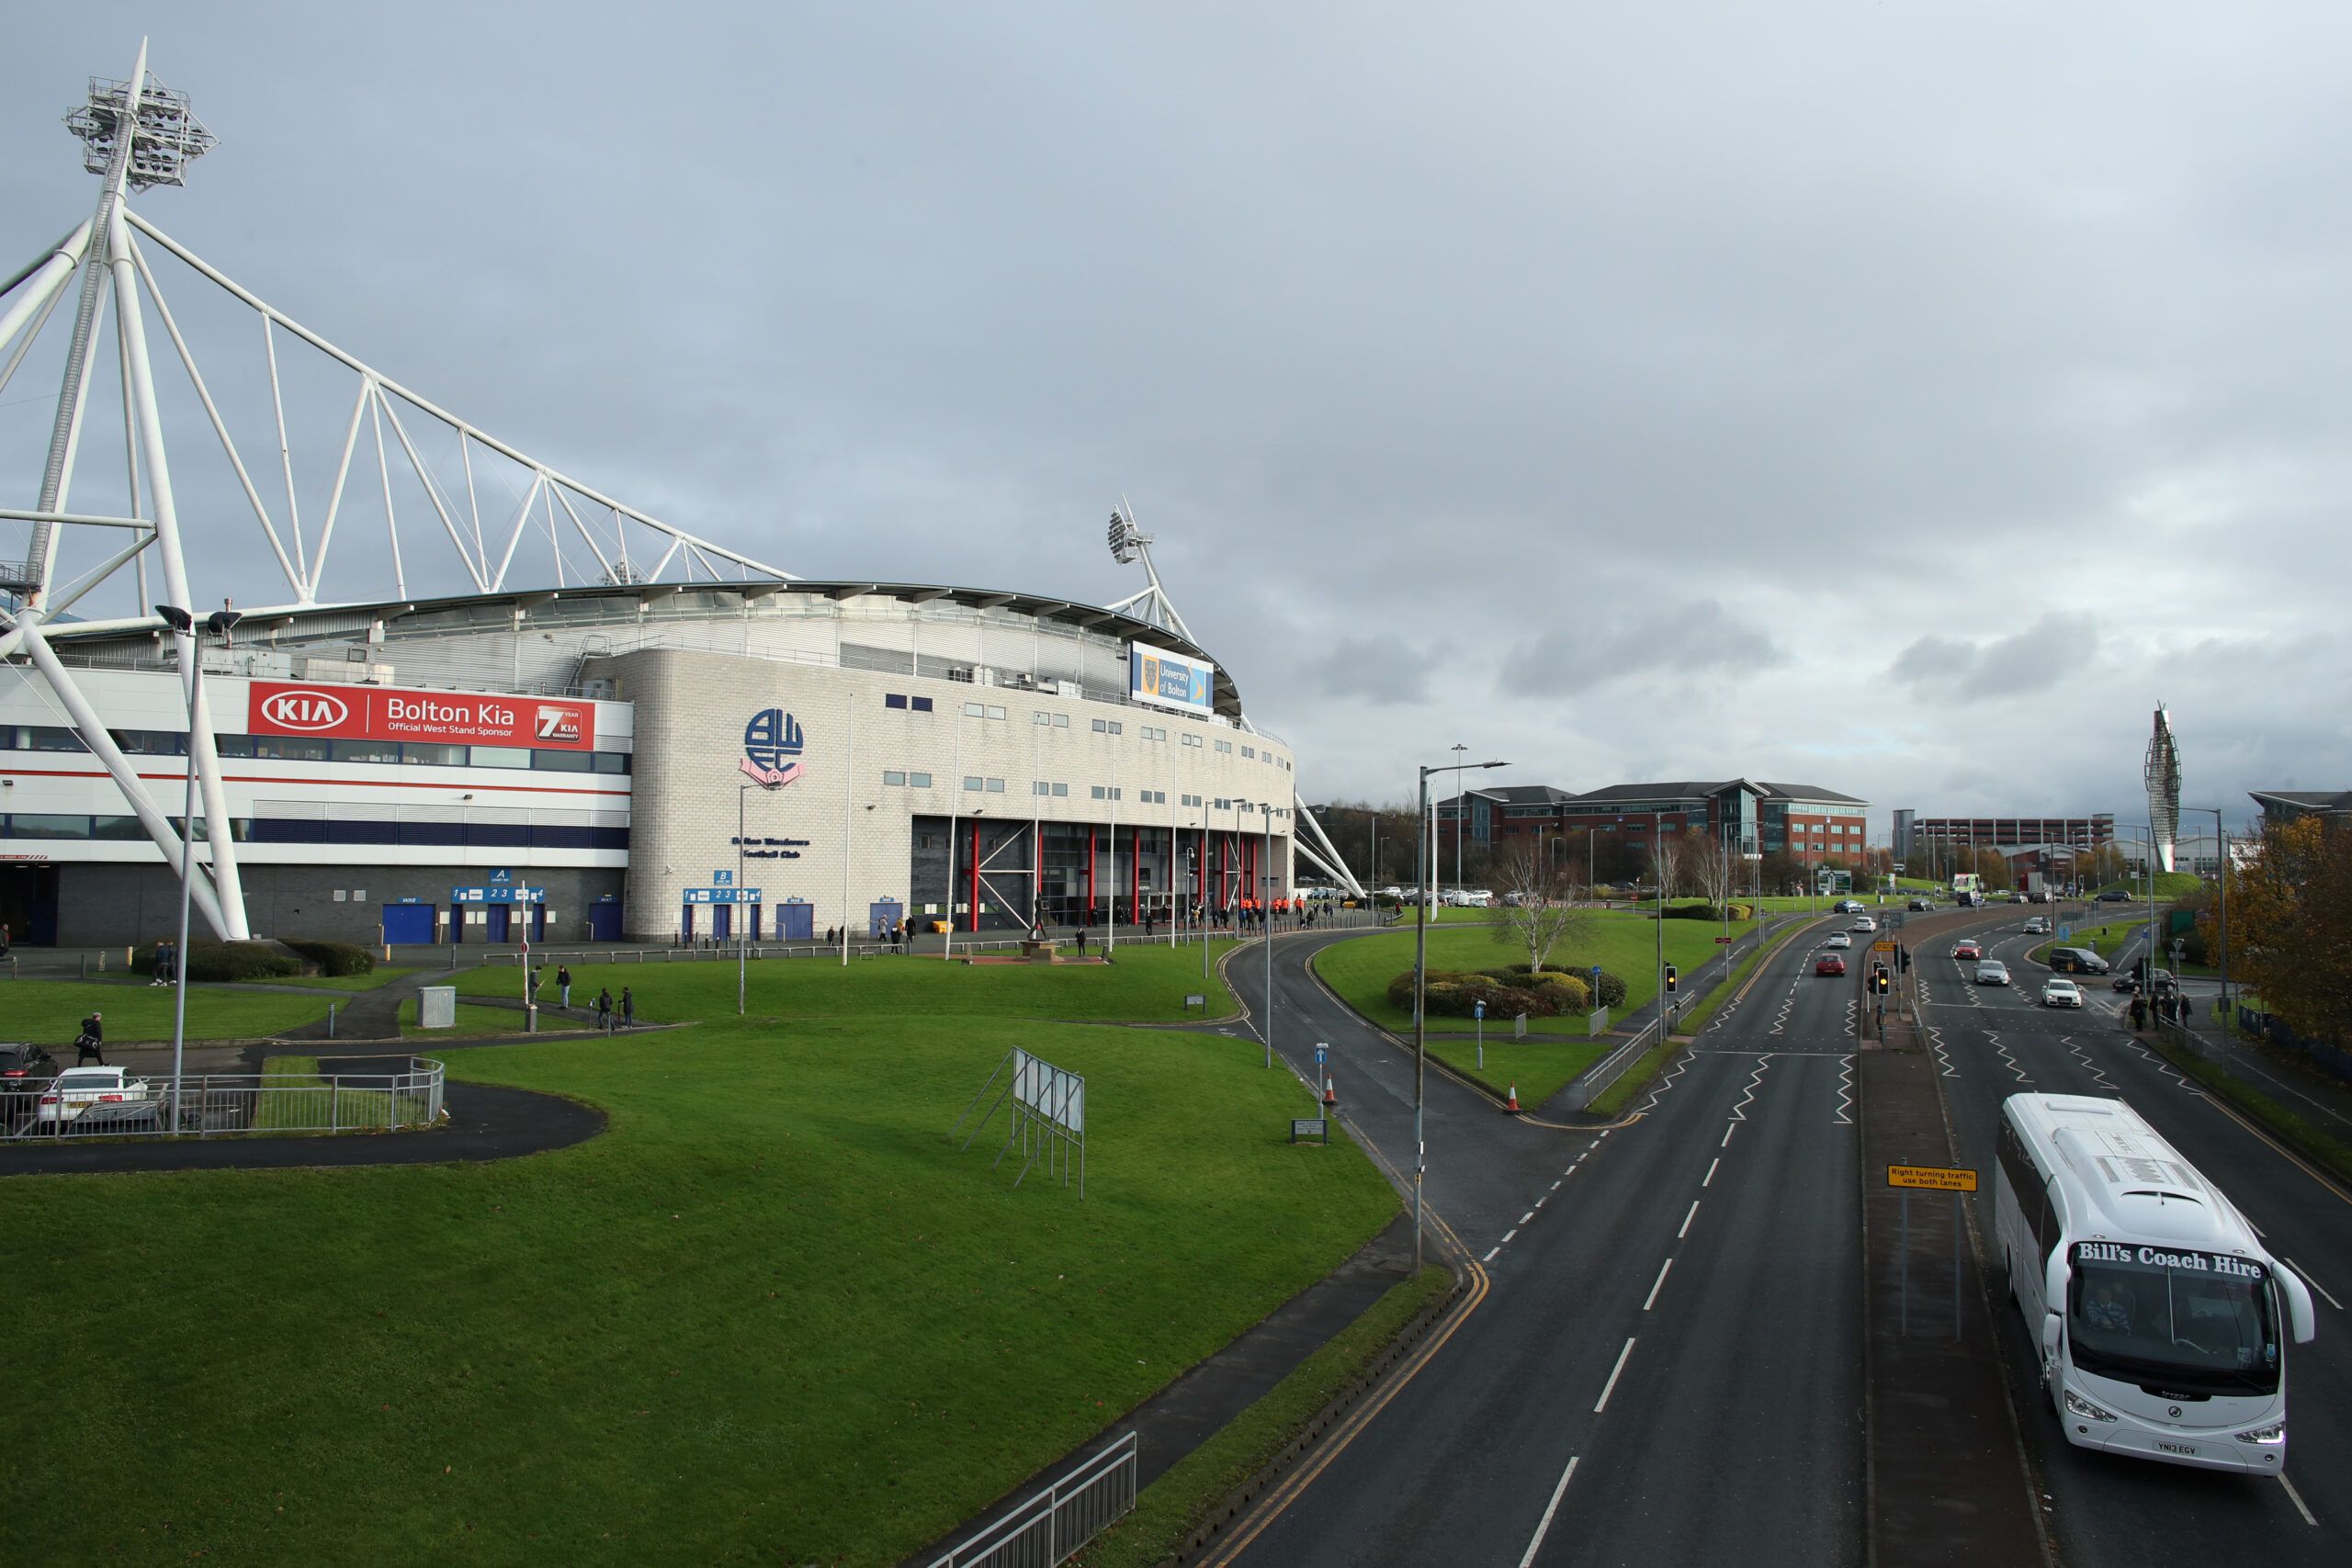 Soccer Football - League One - Bolton Wanderers v Milton Keynes Dons - University of Bolton Stadium, Bolton, Britain - November 16, 2019   General view outside the stadium before the match    Action Images/John Clifton    EDITORIAL USE ONLY. No use with unauthorized audio, video, data, fixture lists, club/league logos or 